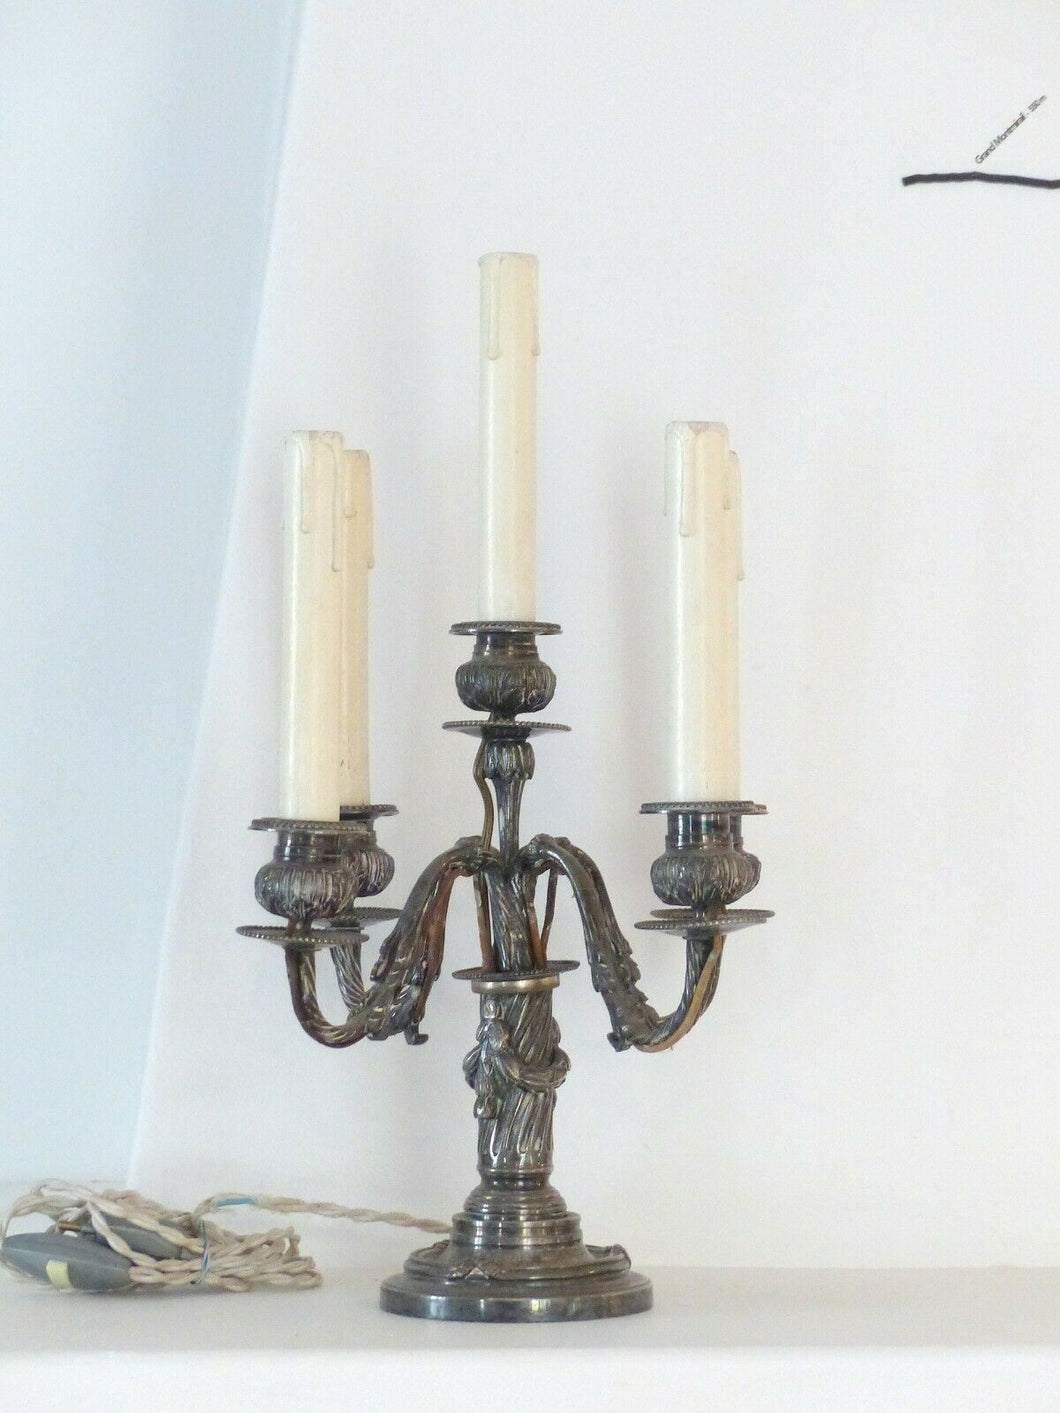 Gorgeous 19th Antique Candelabra Silverplated Bronze Louis XVI style - 5 lights